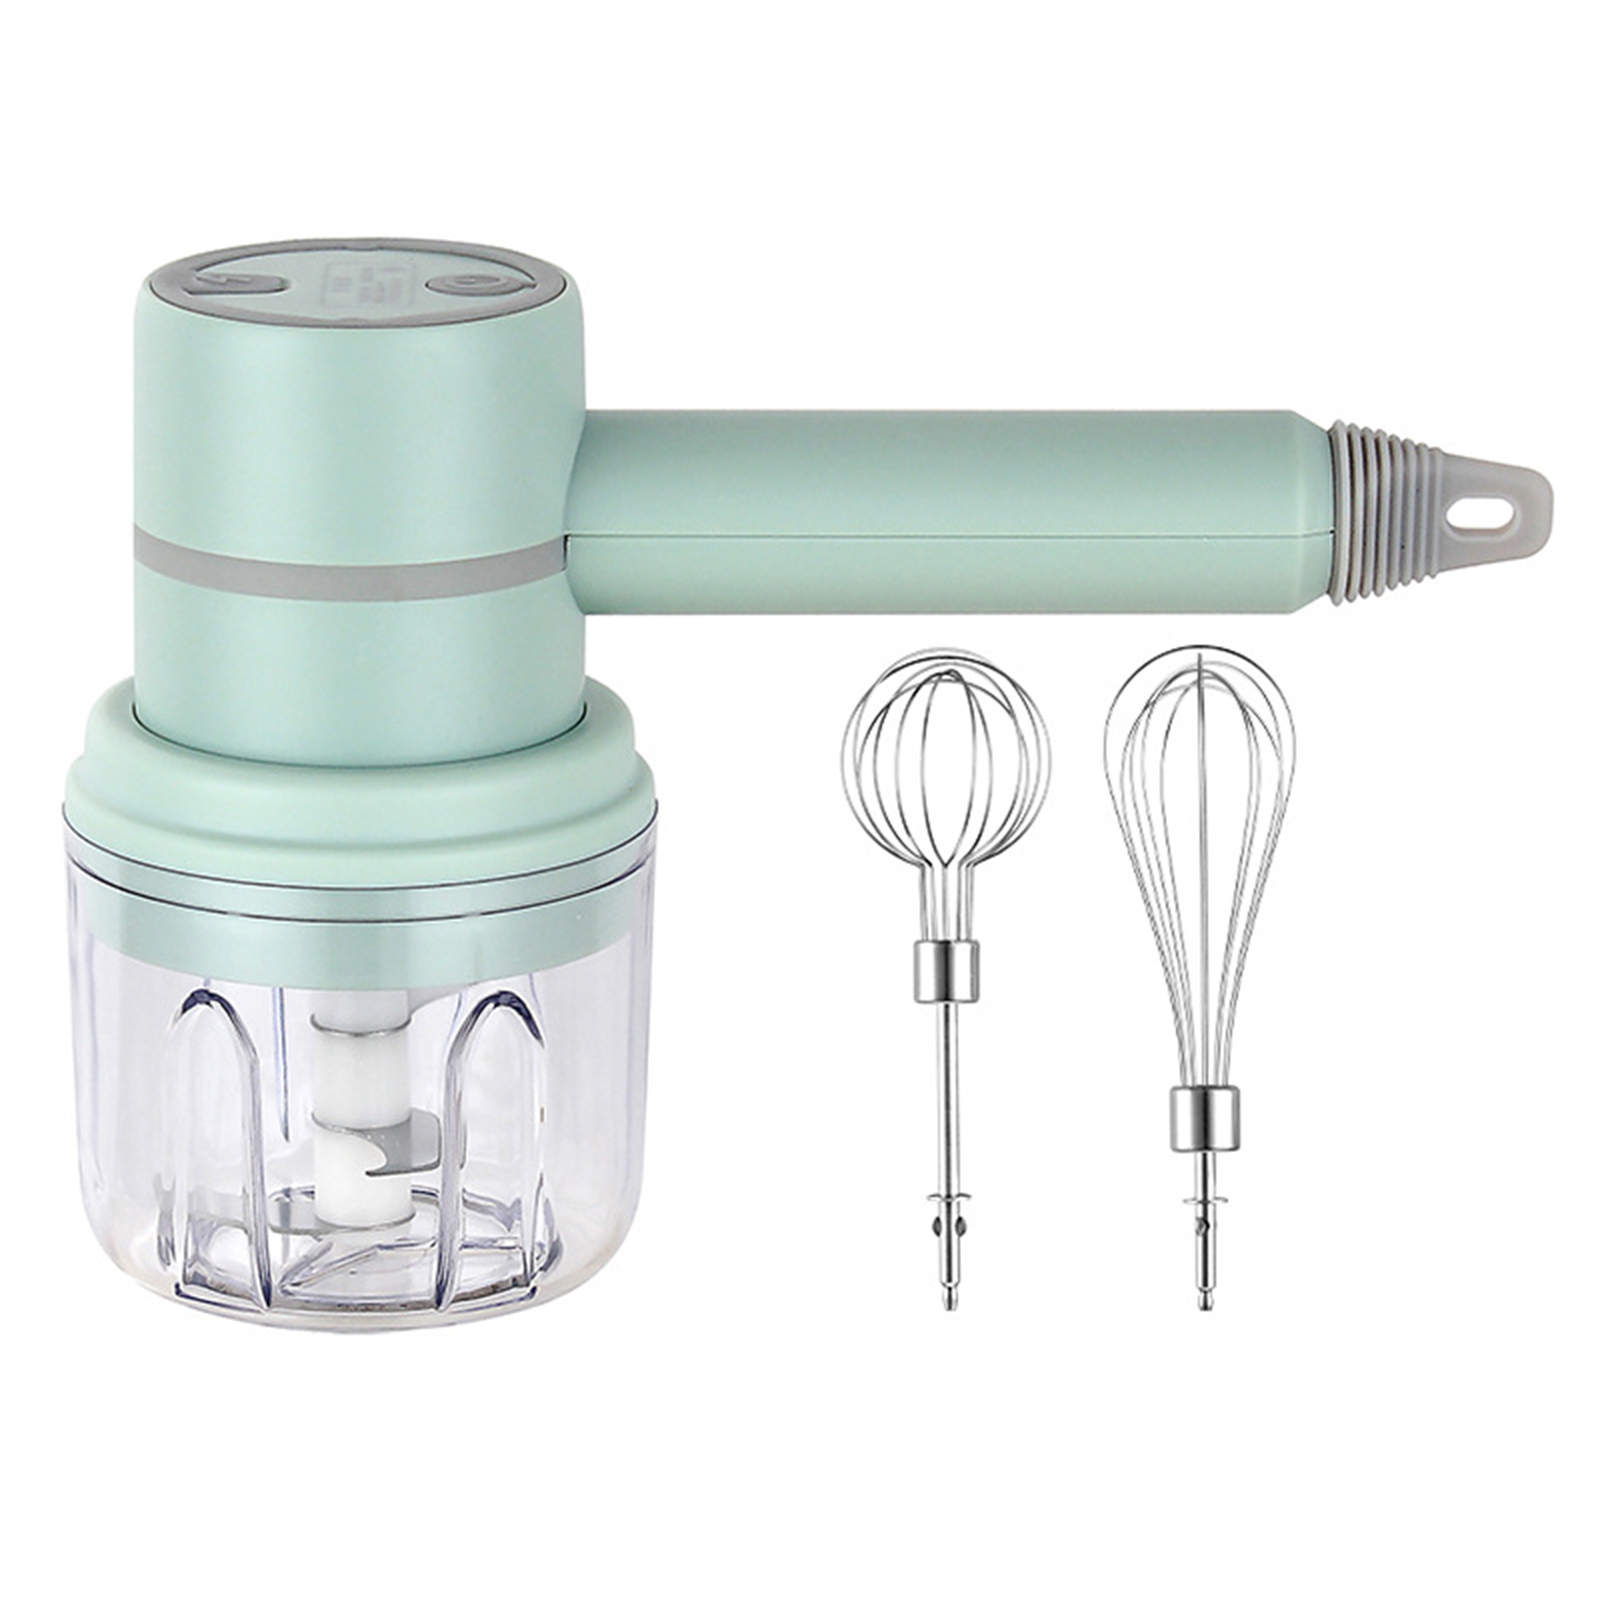 Wireless Electric Food Mixer Household Usb Rechargeable Mini Handheld Egg Beater Baking Hand Mixer Kitchen Tools Green 2 in 1/PC Cup 250ML